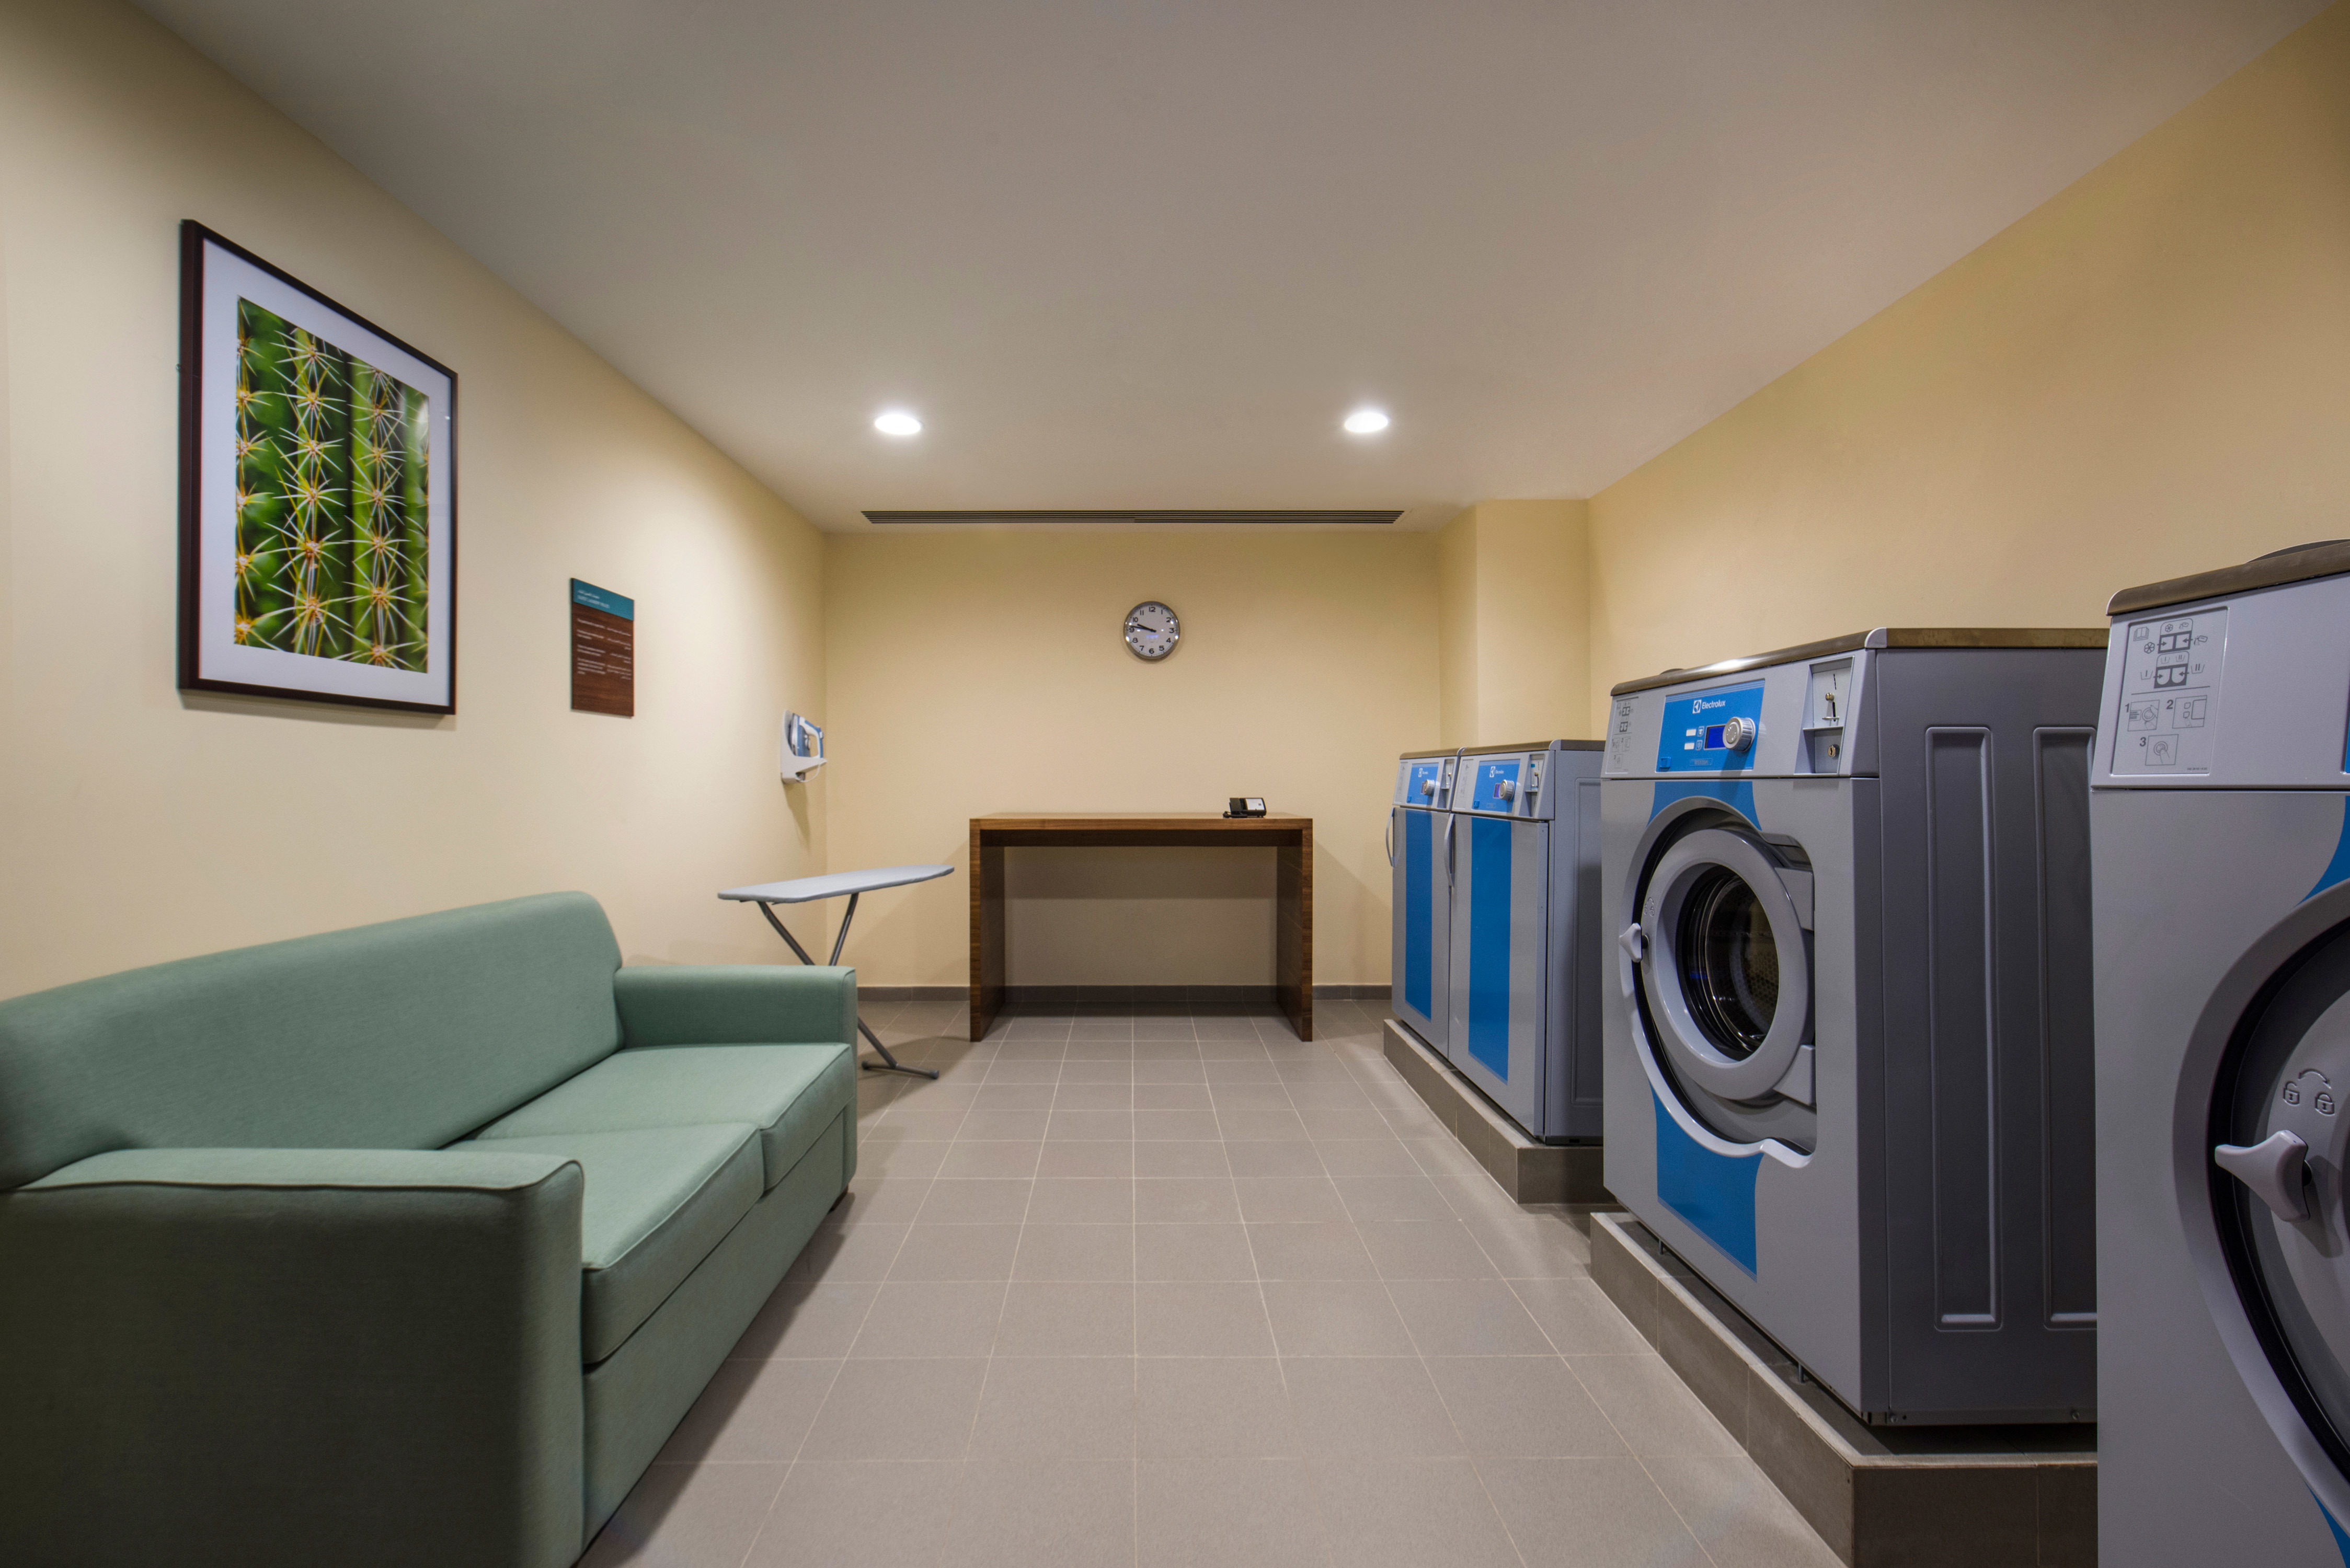 Coin Operated Washing and Drying Machines, Green Sofa and Folding Table in Laundry Facility